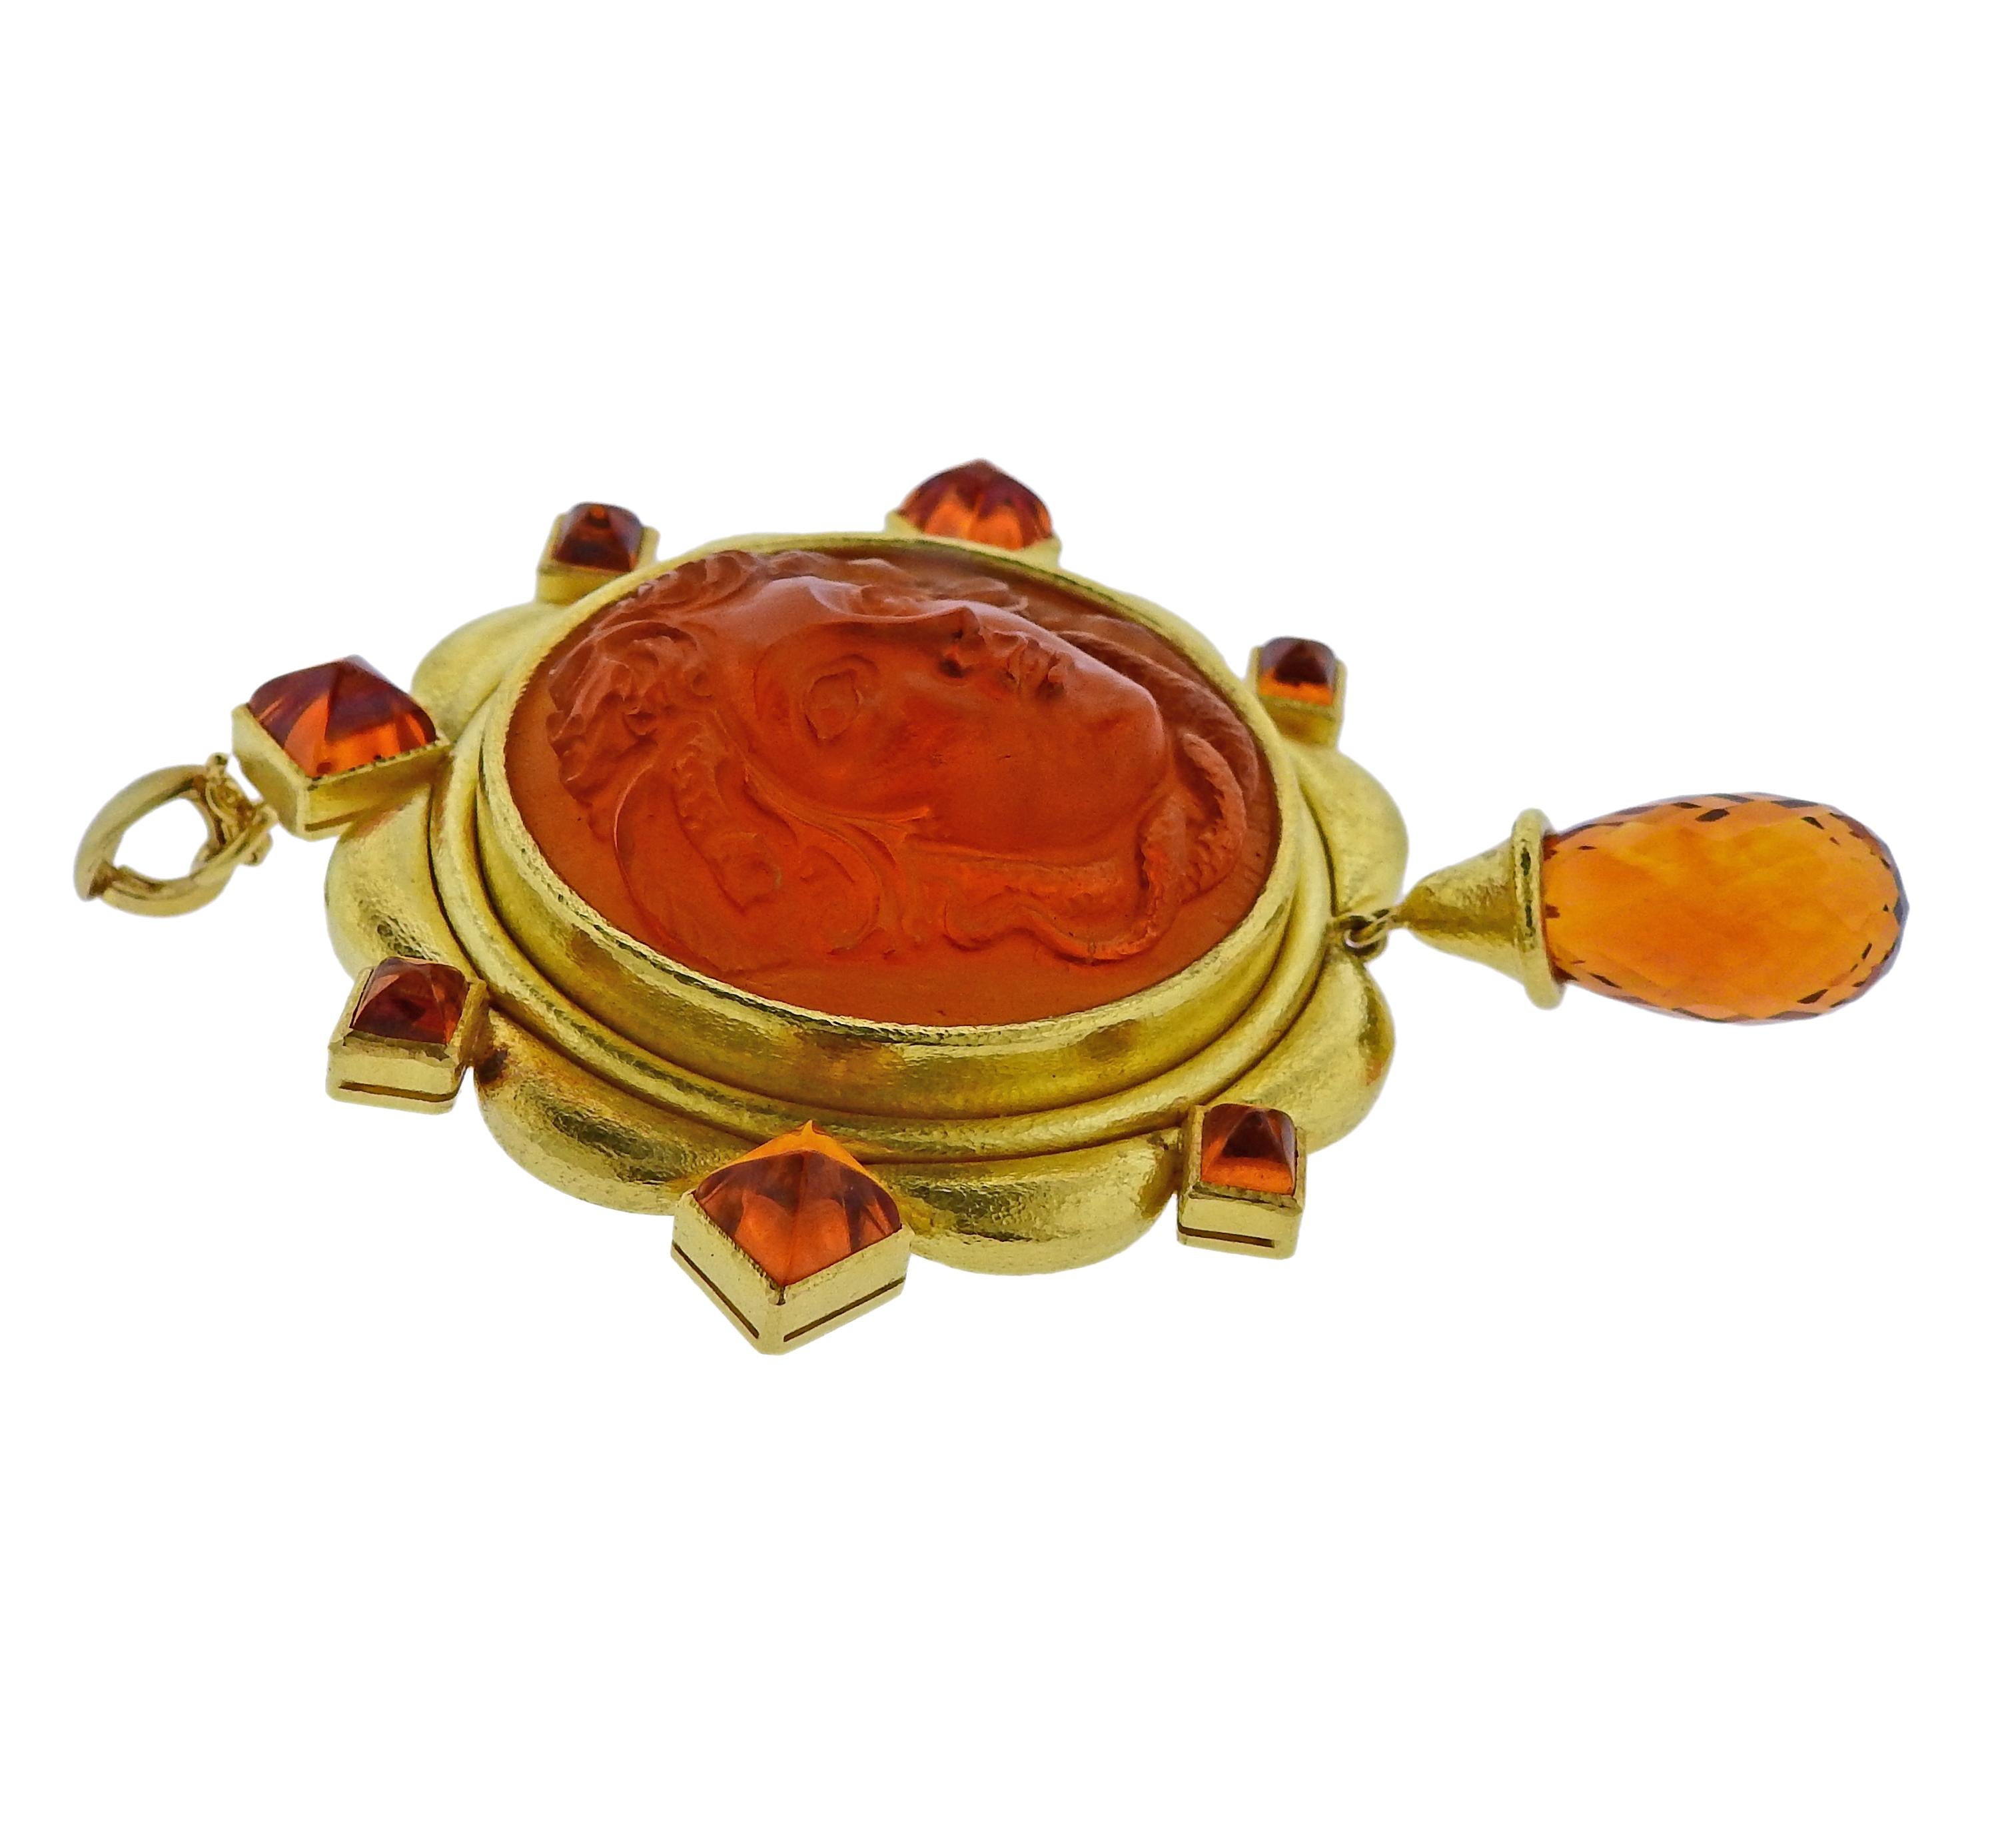 Large 18k yellow gold brooch pendant by Elizabeth Locke, set with Venetian glass cameo, surrounded with citrines. Pendant/brooch is 87mm x 72mm. Weight is 110.3 grams. Marked E Locke 18k. 